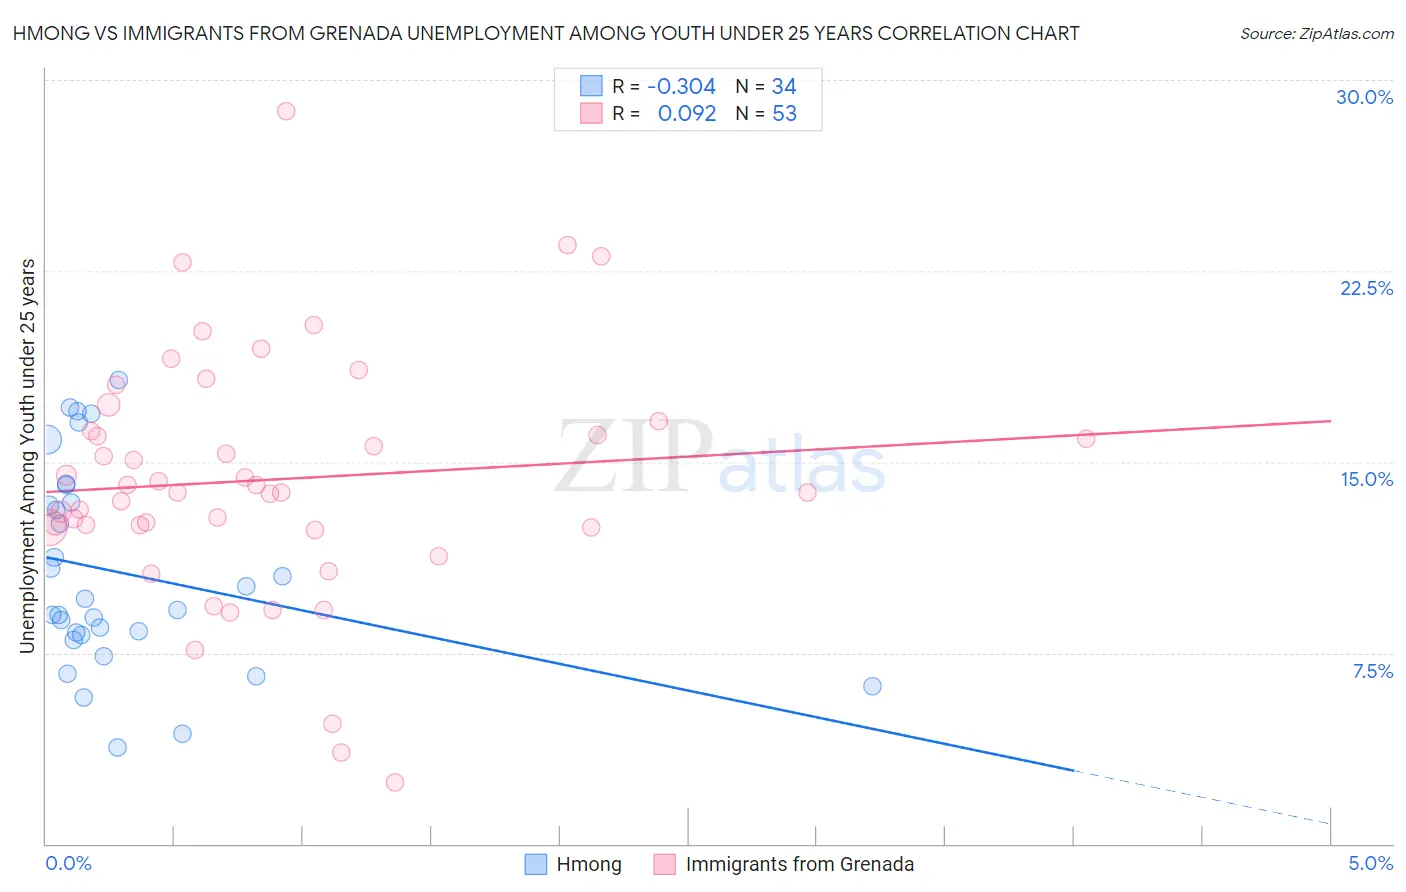 Hmong vs Immigrants from Grenada Unemployment Among Youth under 25 years